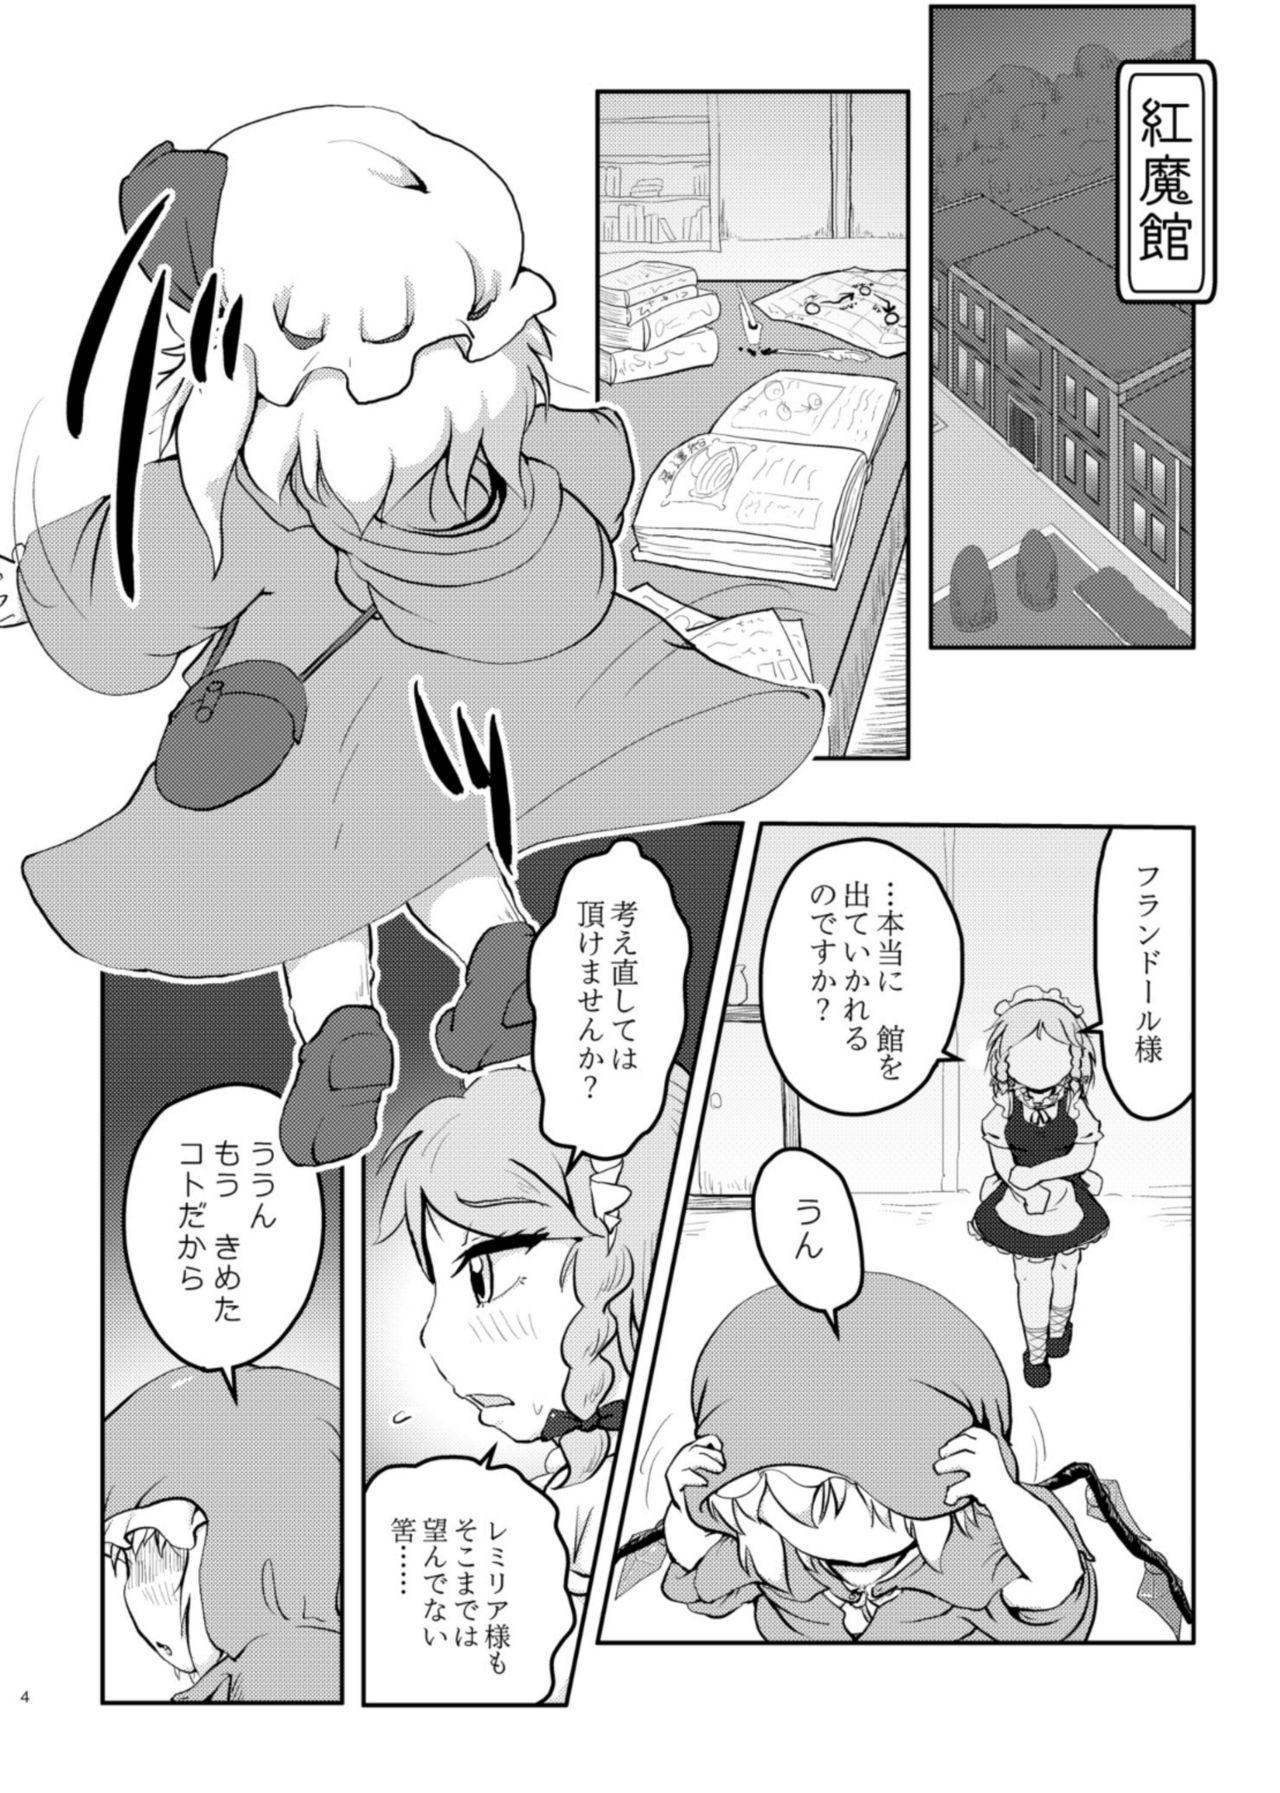 Viet Nam Scarlet Conflict 2 - Touhou project Reverse Cowgirl - Page 4